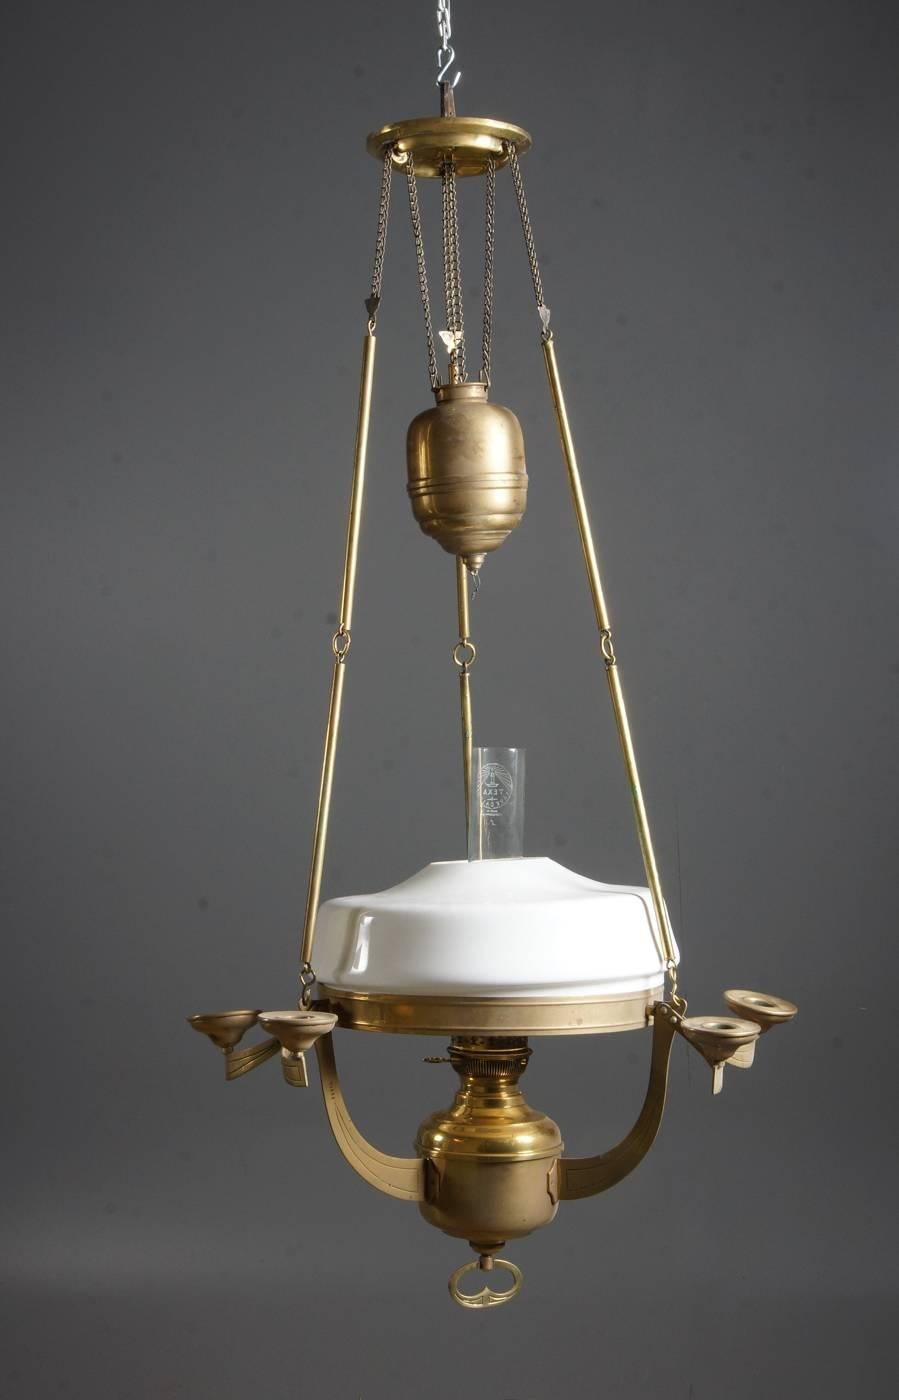 Large Art Nouveau brass hanging kerosene lamp from 1890-1900.
Three foot chain and canopy with opaline glass.
With light arms for six candles. Cup with notch.
 Measures: Height 105cm, diameter 57cm.

 